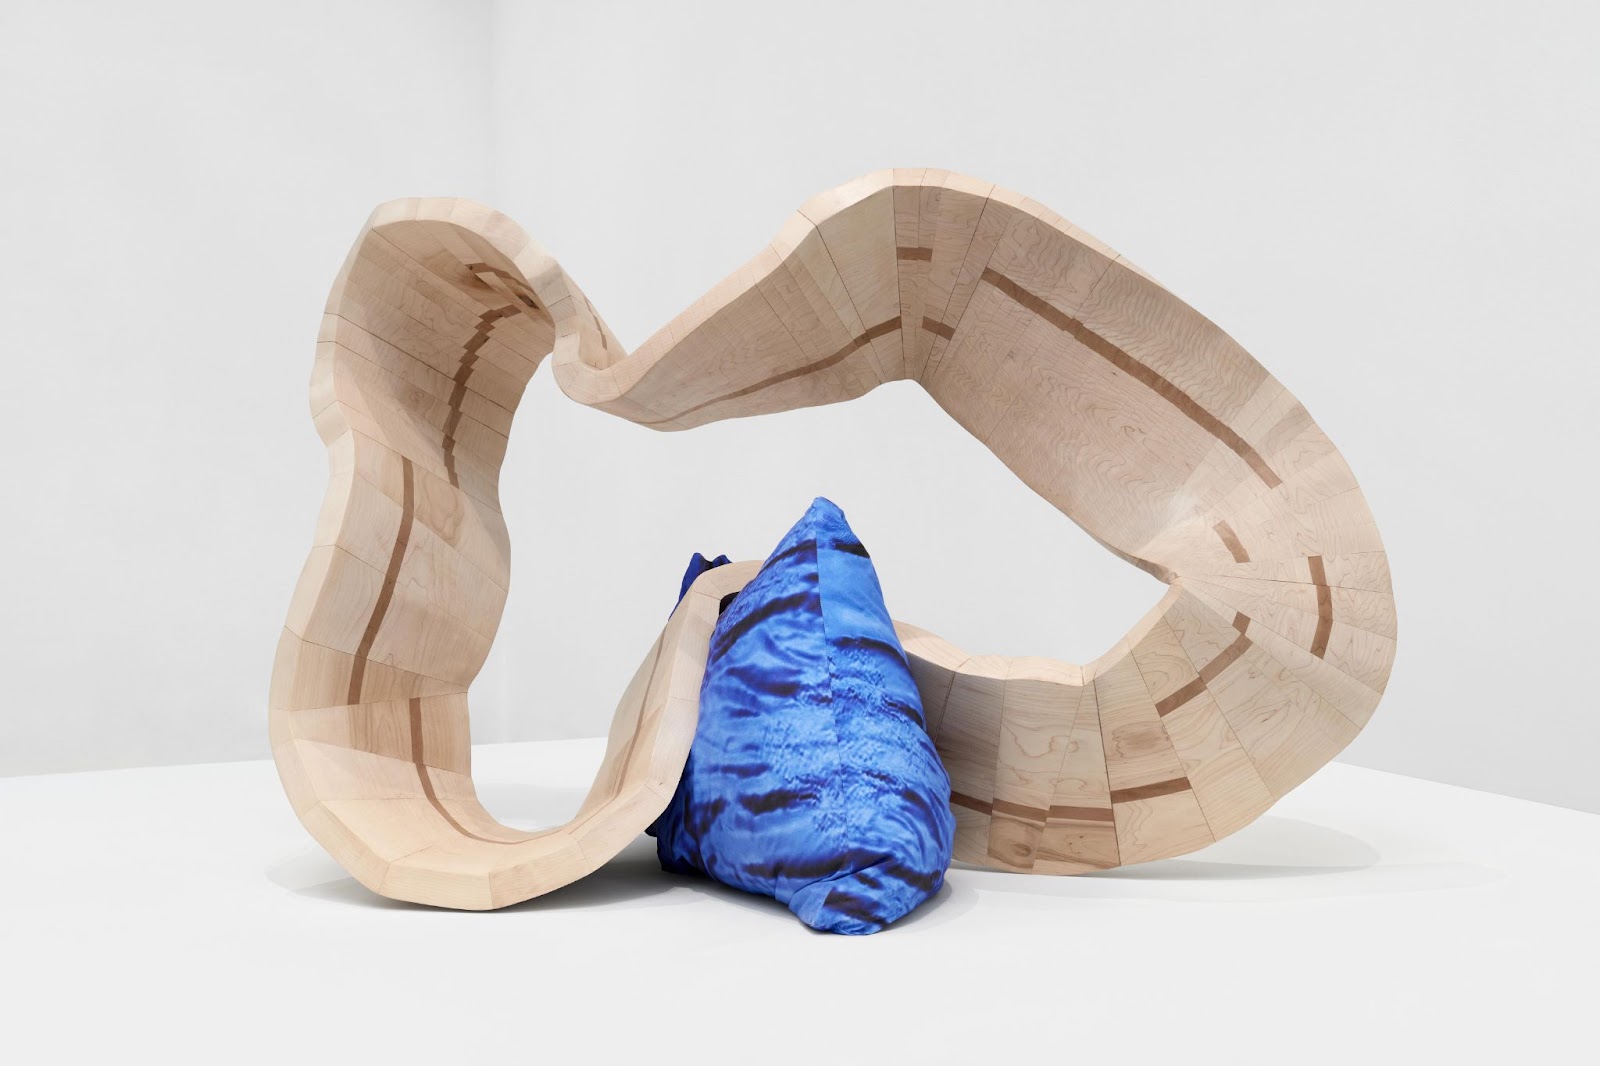 Irregularly shaped wooden mobius strips made up of small sectors of wood;  the sculpture rests on a blue pillow.